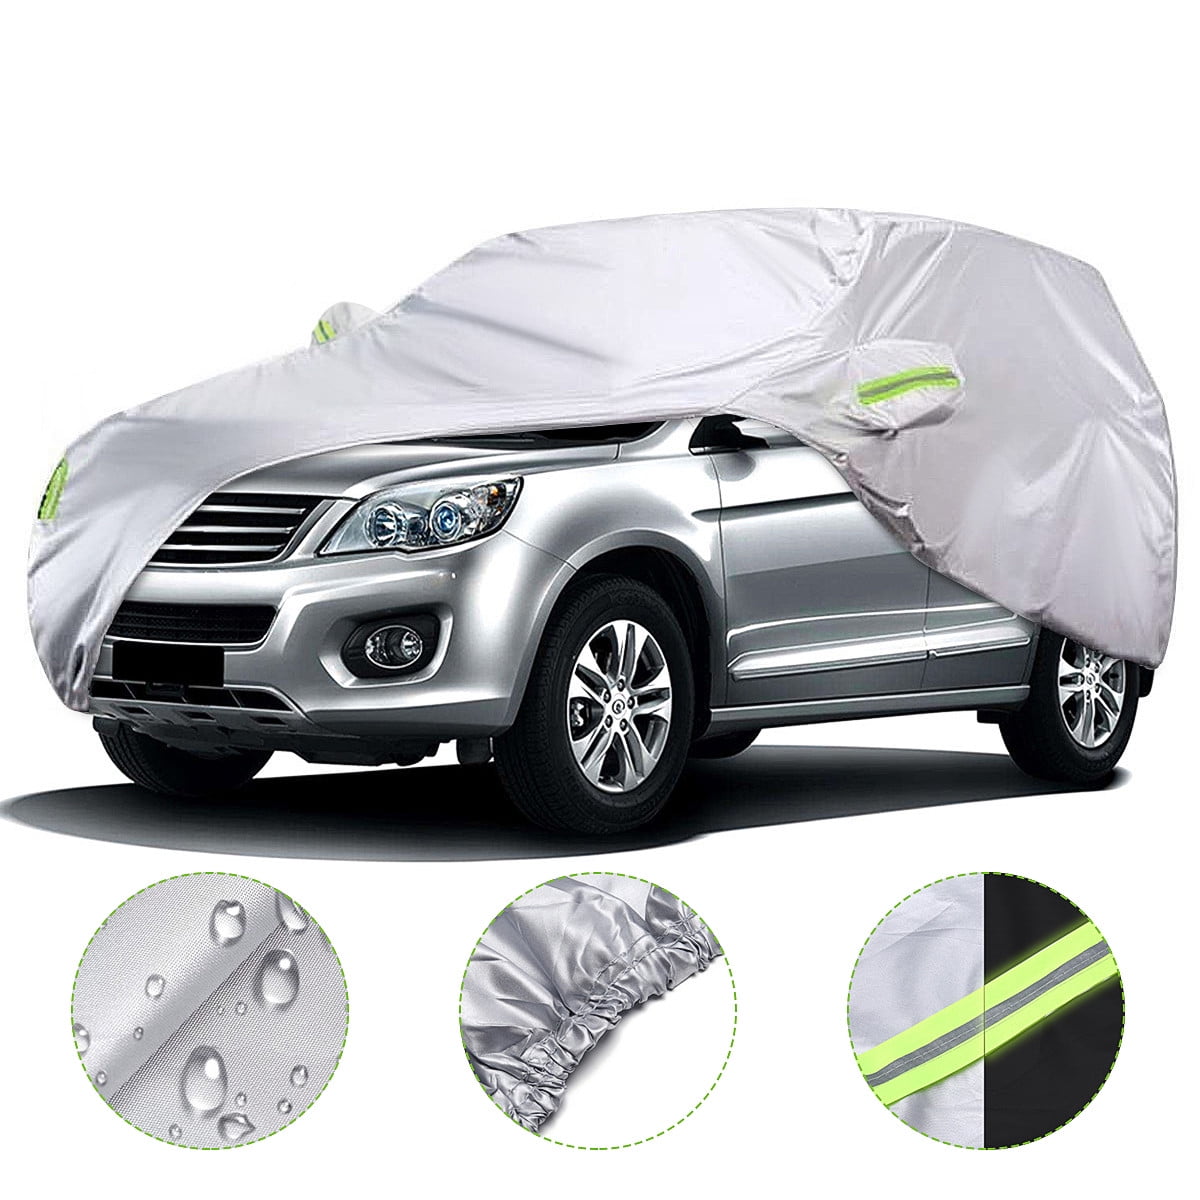 190t M/l/xl/xxl Universal Full Car Cover With Reflector Mirror Cover  Outdoor Indoor Waterproof Sunscreen Anti Uv Dustproof Black Auto Styling --  For S